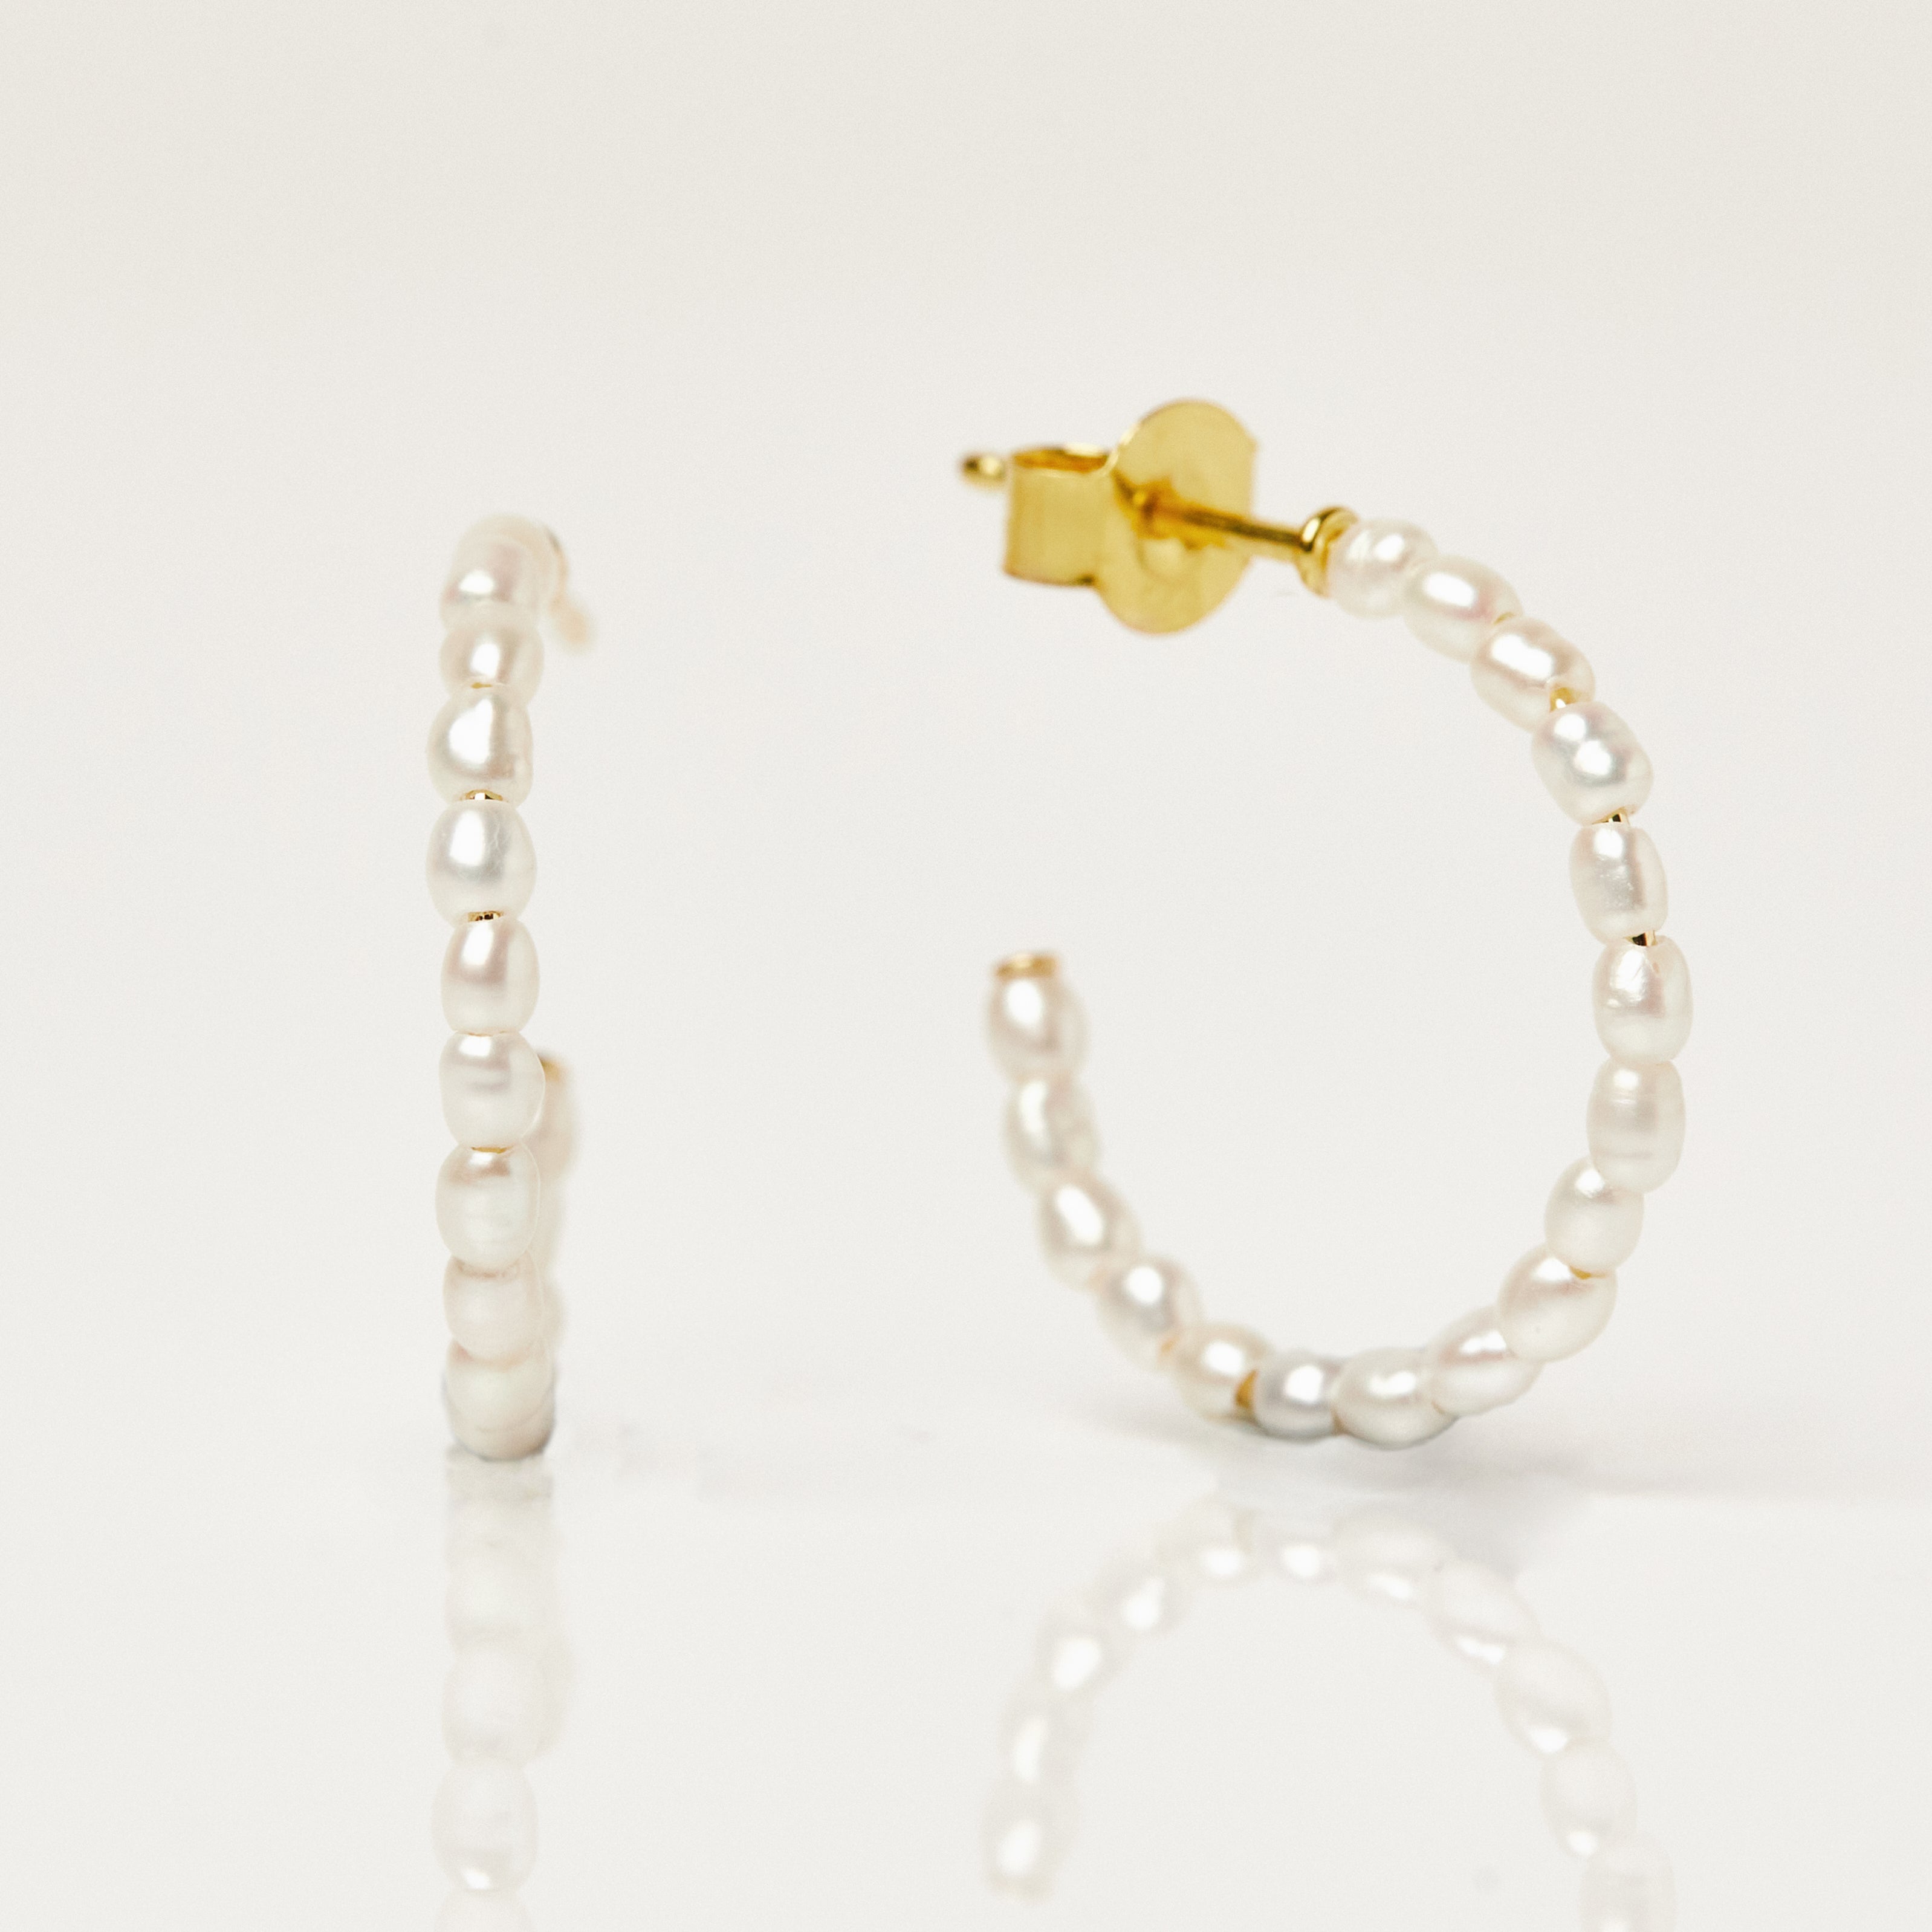 Buy Beautiful White Pearl Hoop Earrings for Women Online In India At  Discounted Prices